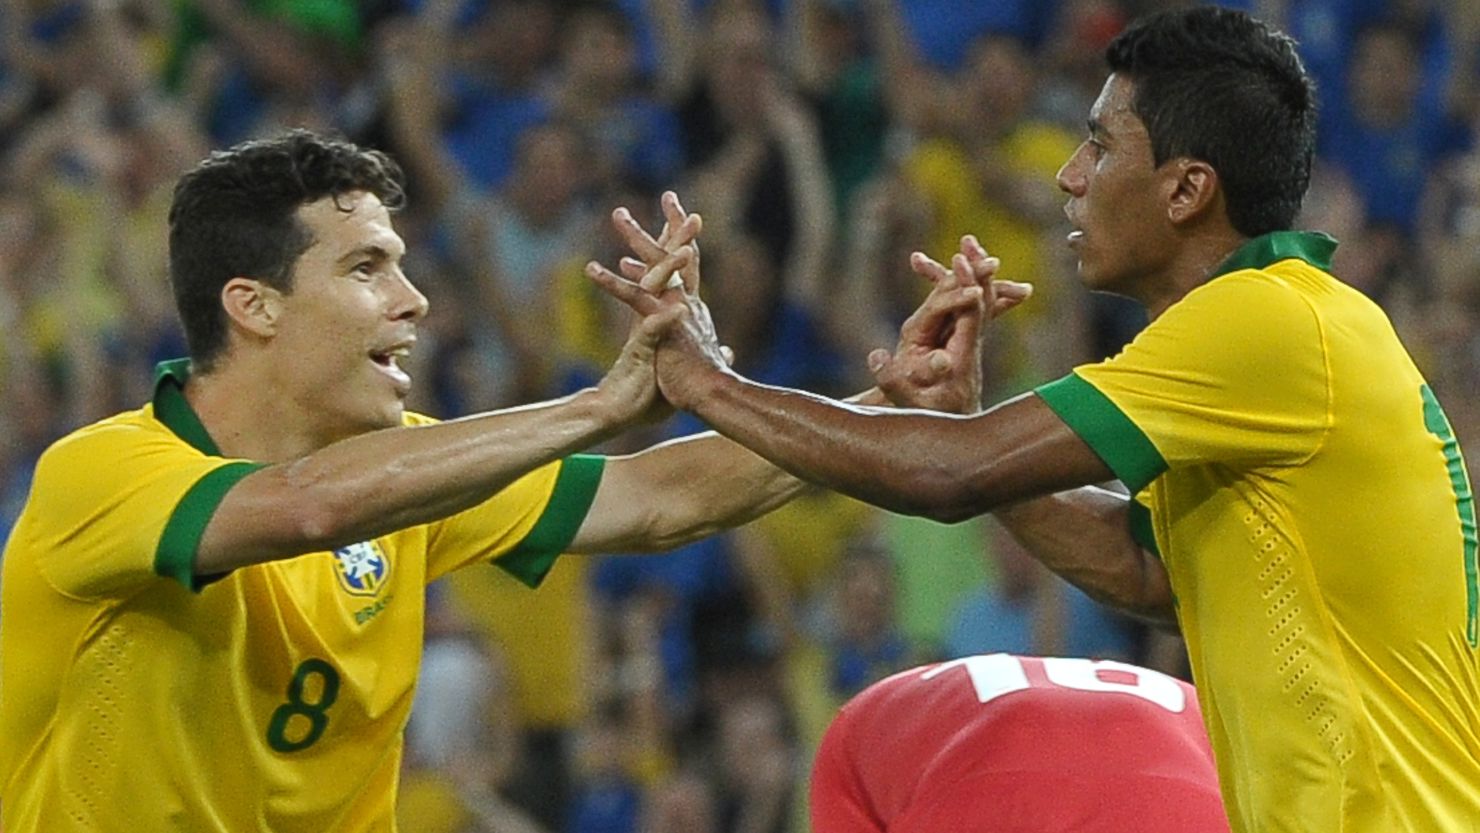 Brazil's Paulinho (R) celebrates with teammate Hermanes after scoring the equalizer against England.